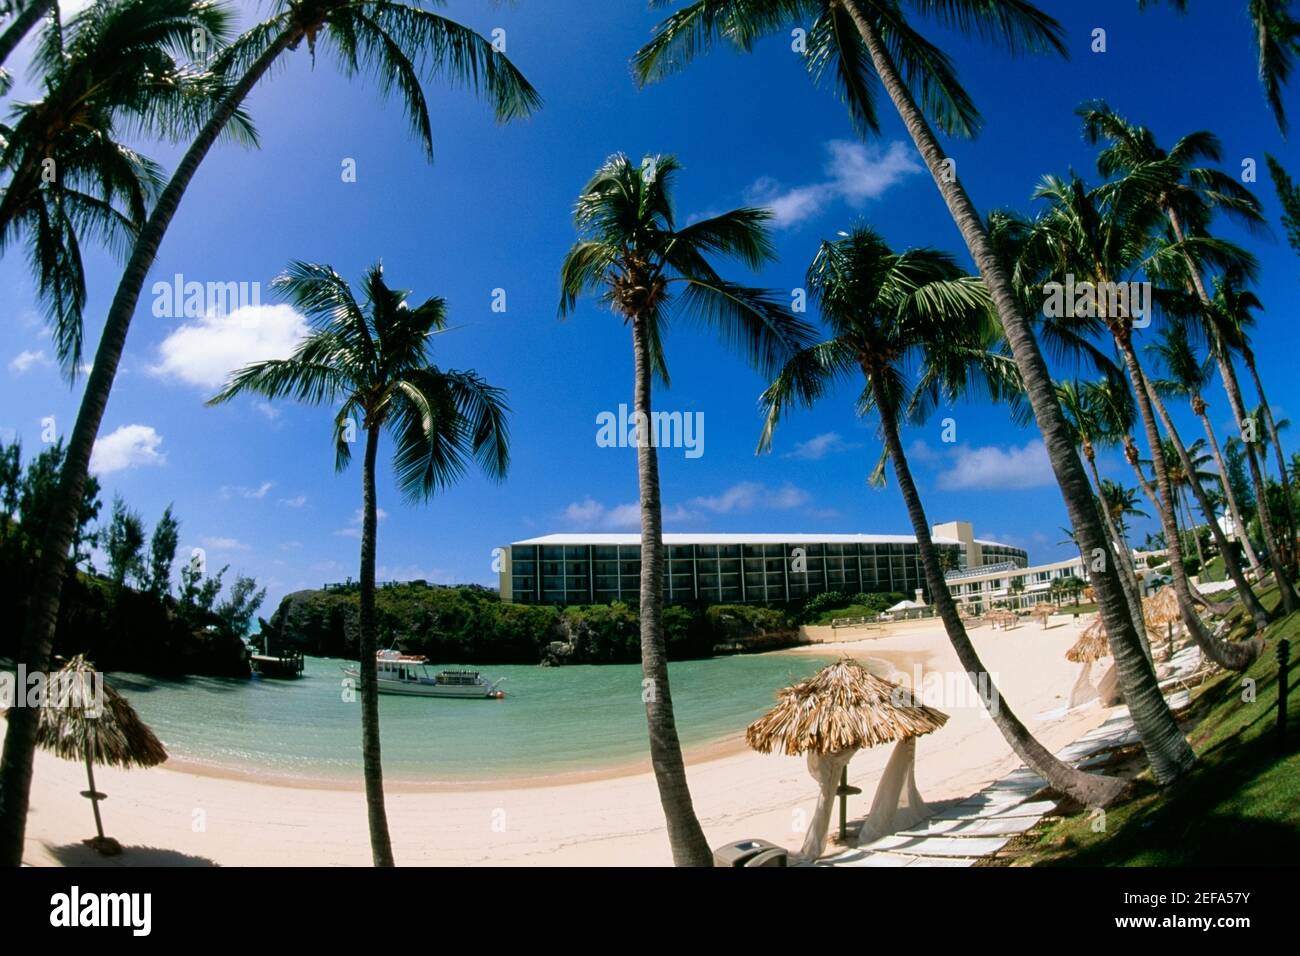 Low angle view of palm trees on a beach, Somesta hotel, Bermuda Stock Photo